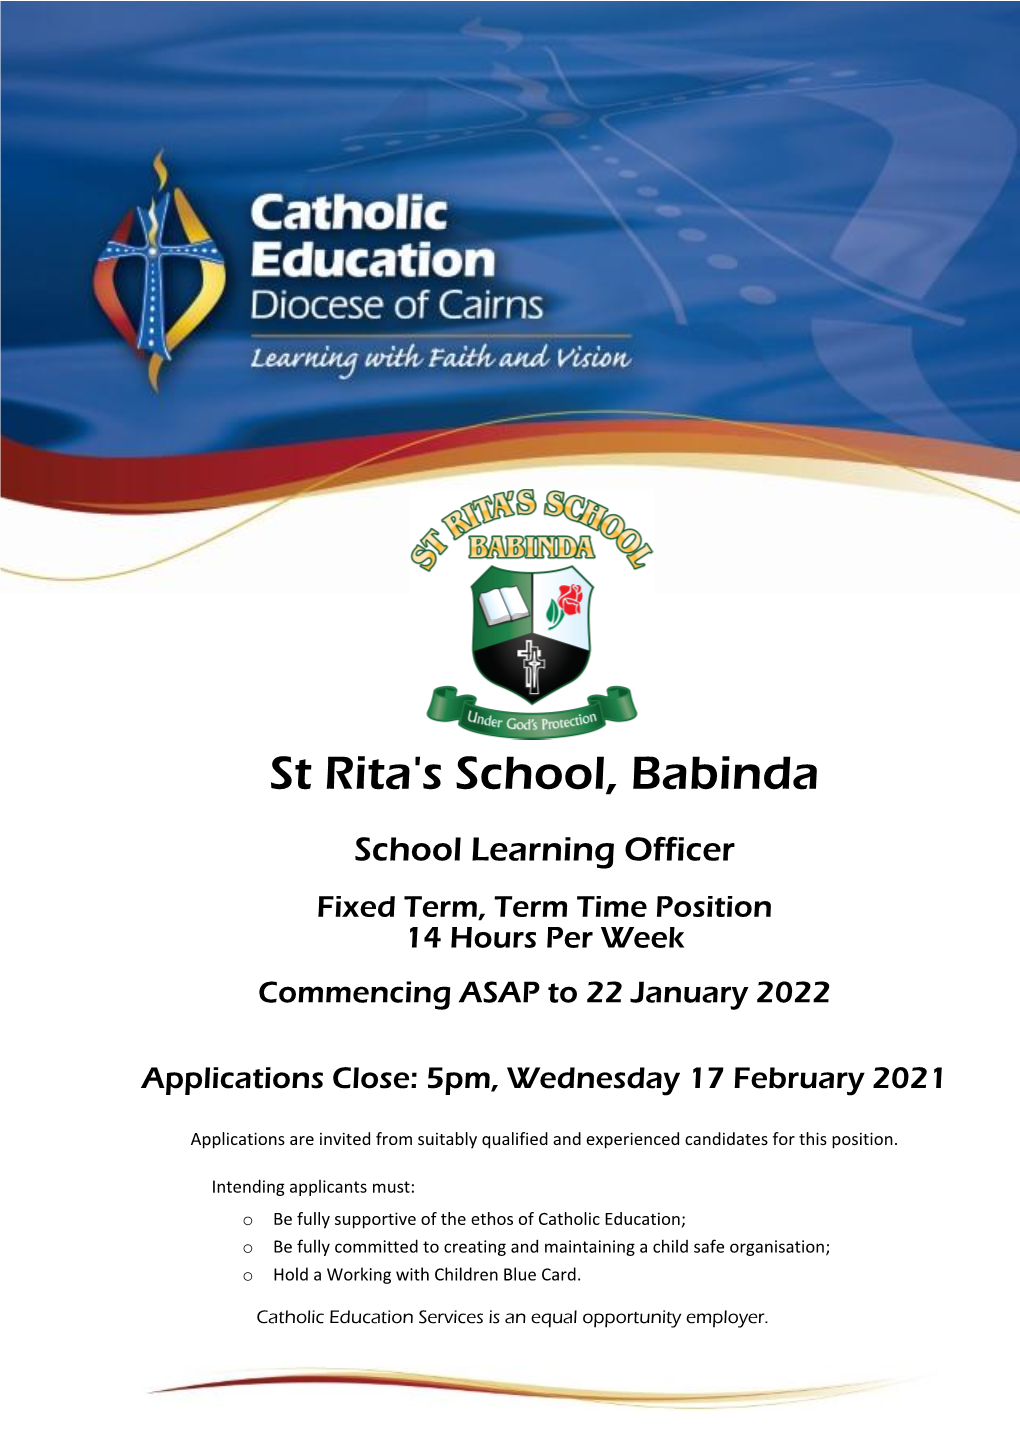 St Rita's School, Babinda School Learning Officer Fixed Term, Term Time Position 14 Hours Per Week Commencing ASAP to 22 January 2022